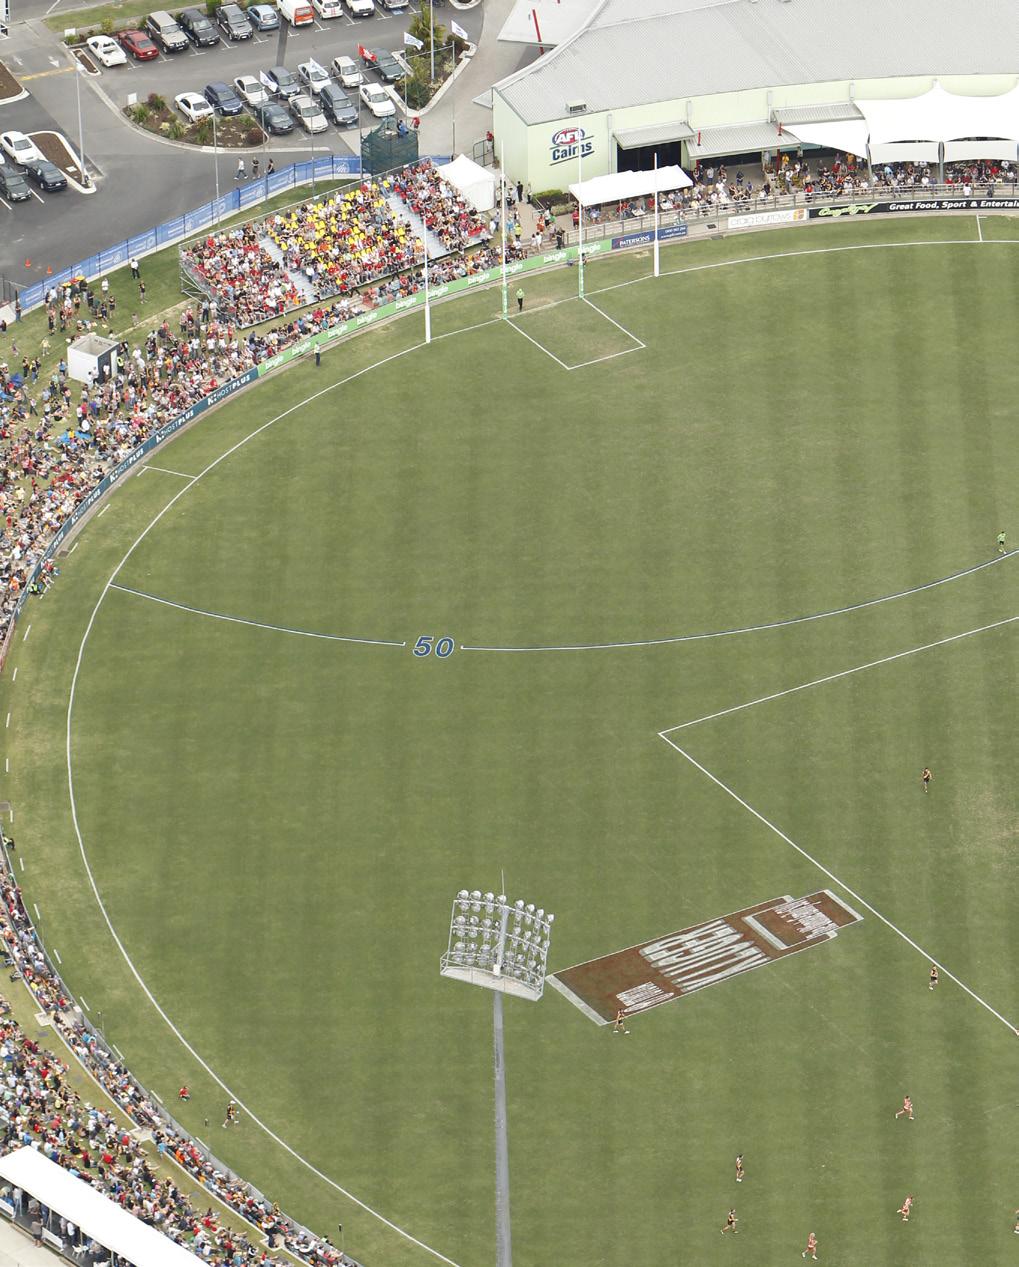 ENTERTAIN YOUR GUESTS In 2012, Cairns hosts its second Toyota AFL Premiership Season match when Richmond takes on